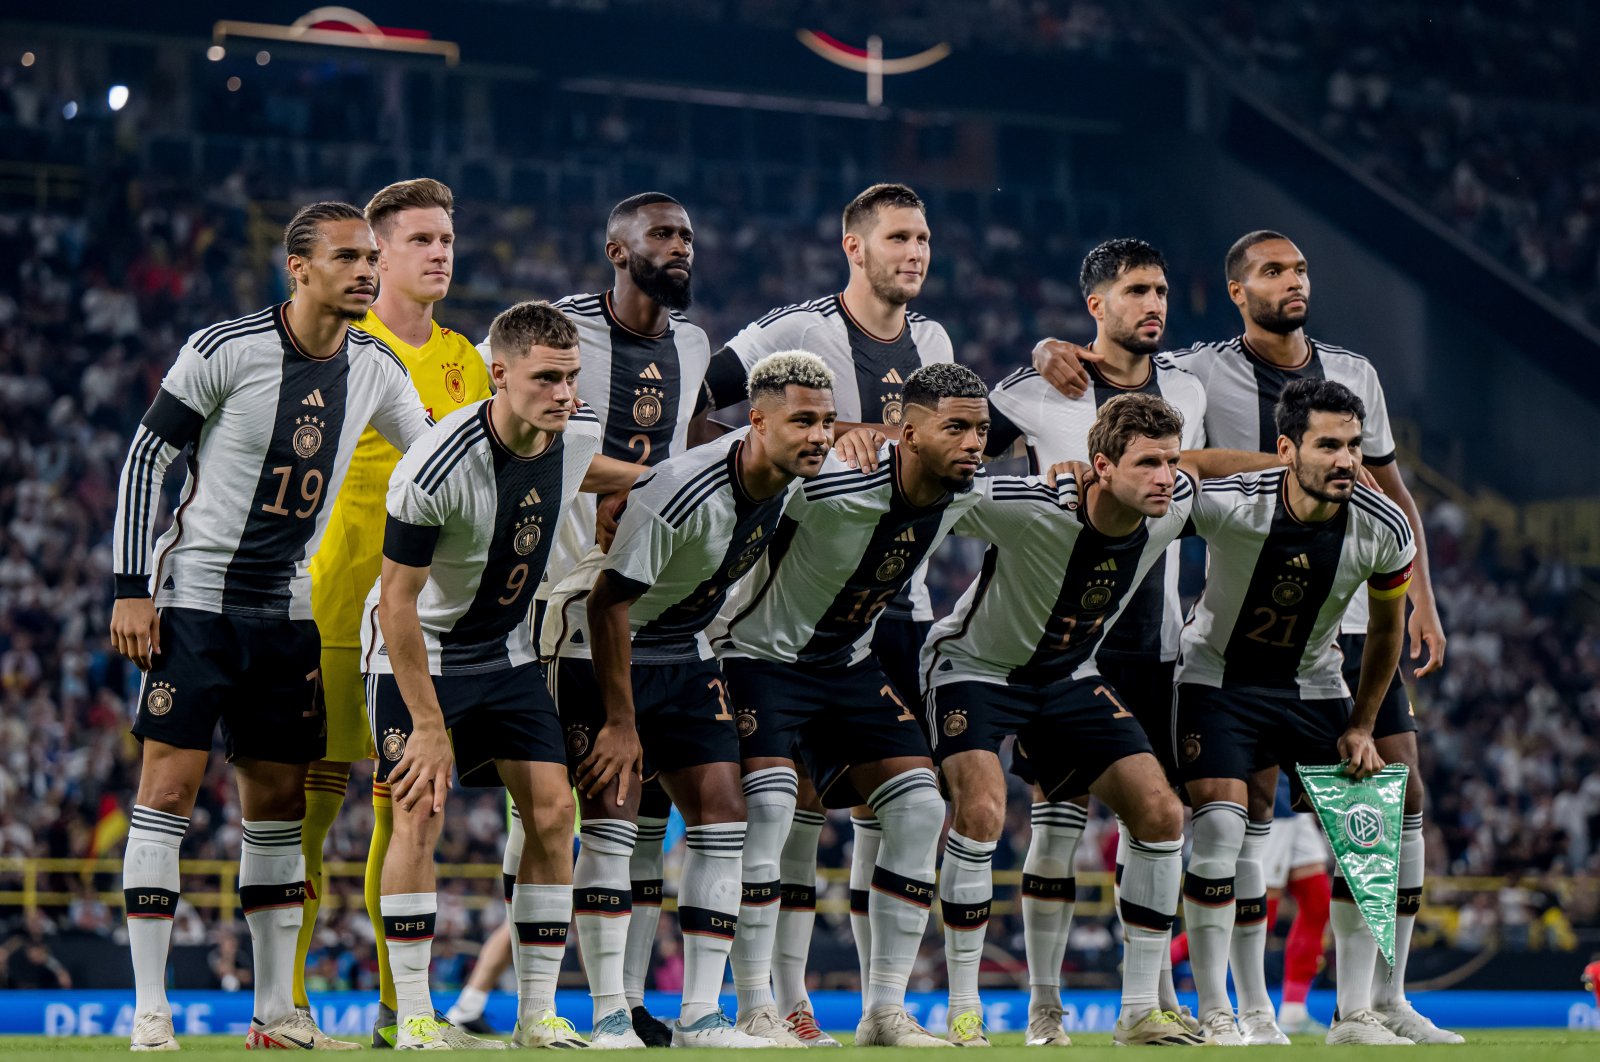 Starting line-up Germany poses for a photo before the international friendly match against France at Signal Iduna Park, Dortmund, Germany, Sept. 12, 2023. (Getty Images Photo)